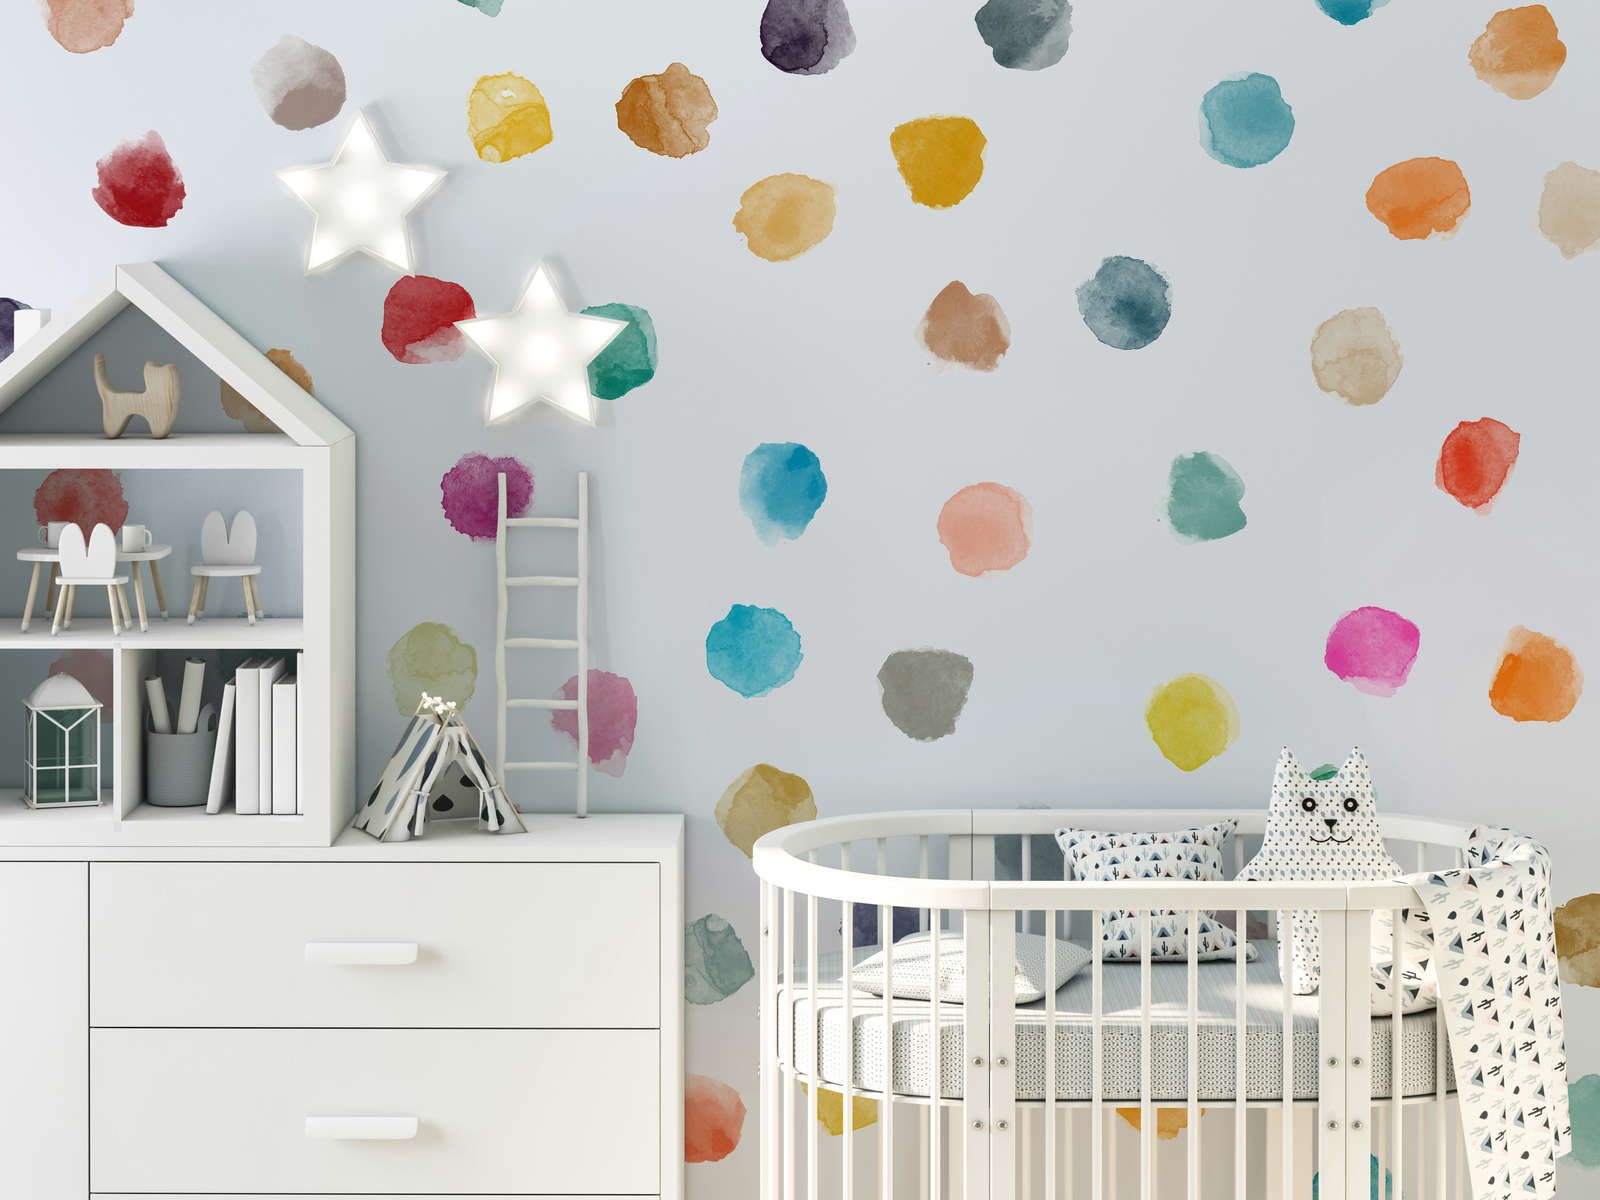             Nursery mural with colourful dots - Smooth & pearlescent fleece
        